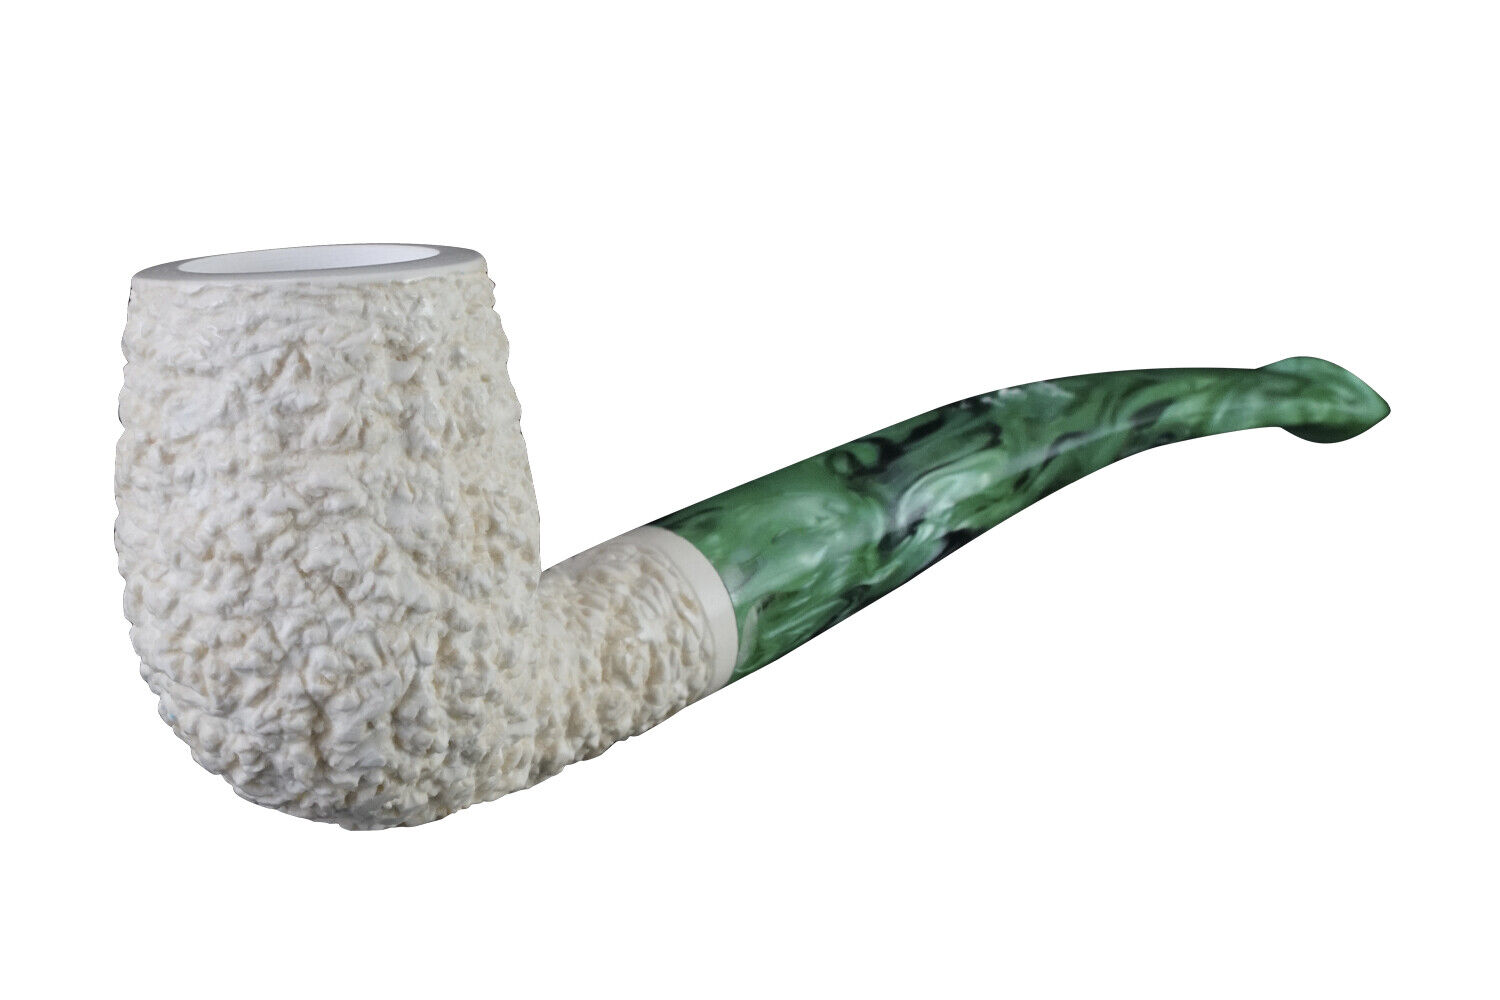 Meerschaum Pipe classic hand carved green stem smoking tobacco with case MD-35